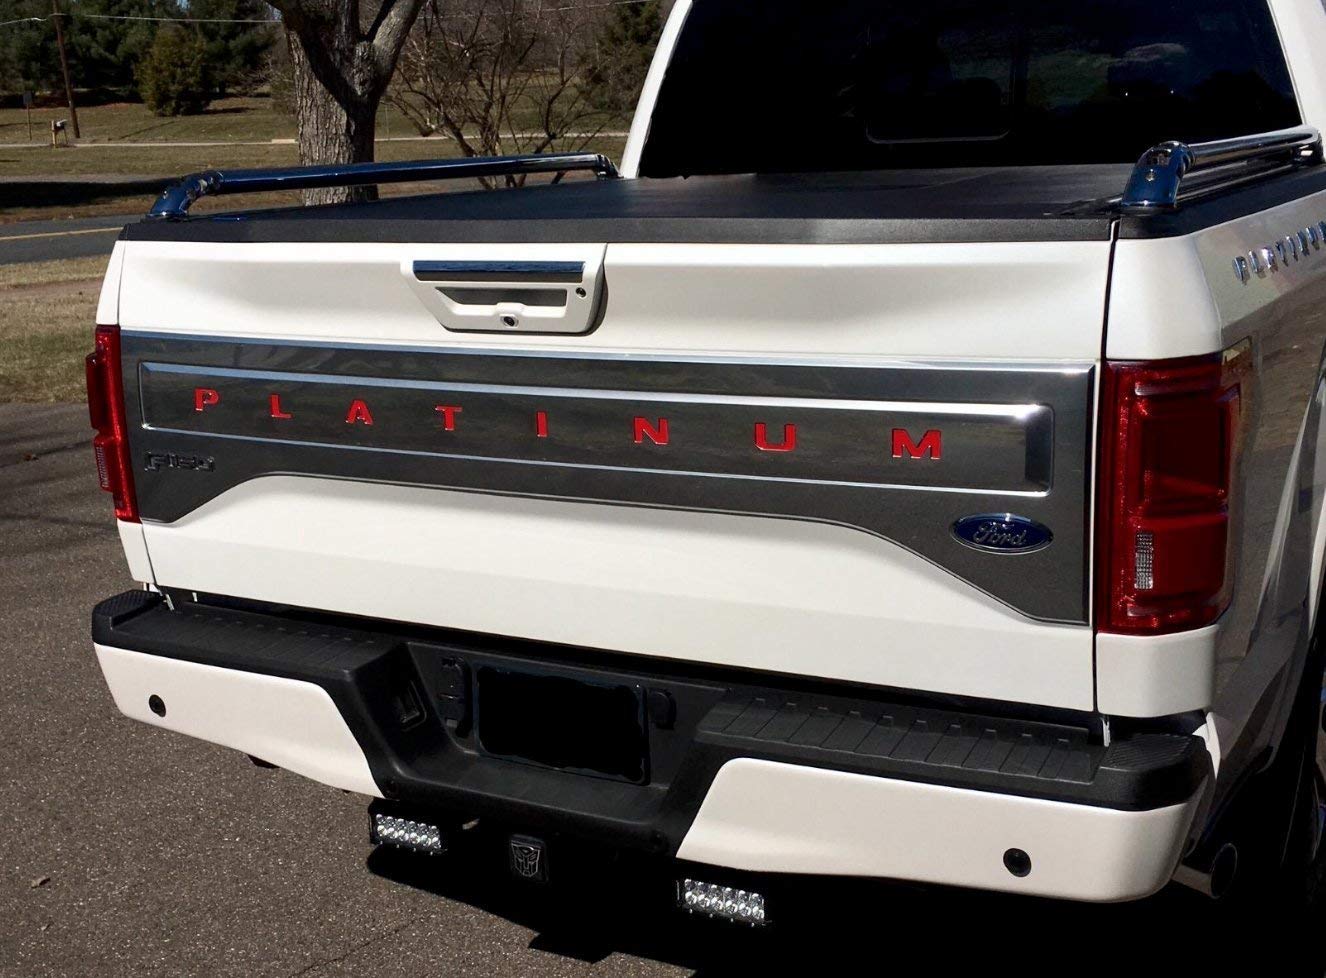 SF Sales USA Black Letters for F-150 2018-2019 F150 Tailgate Inserts Not Decals